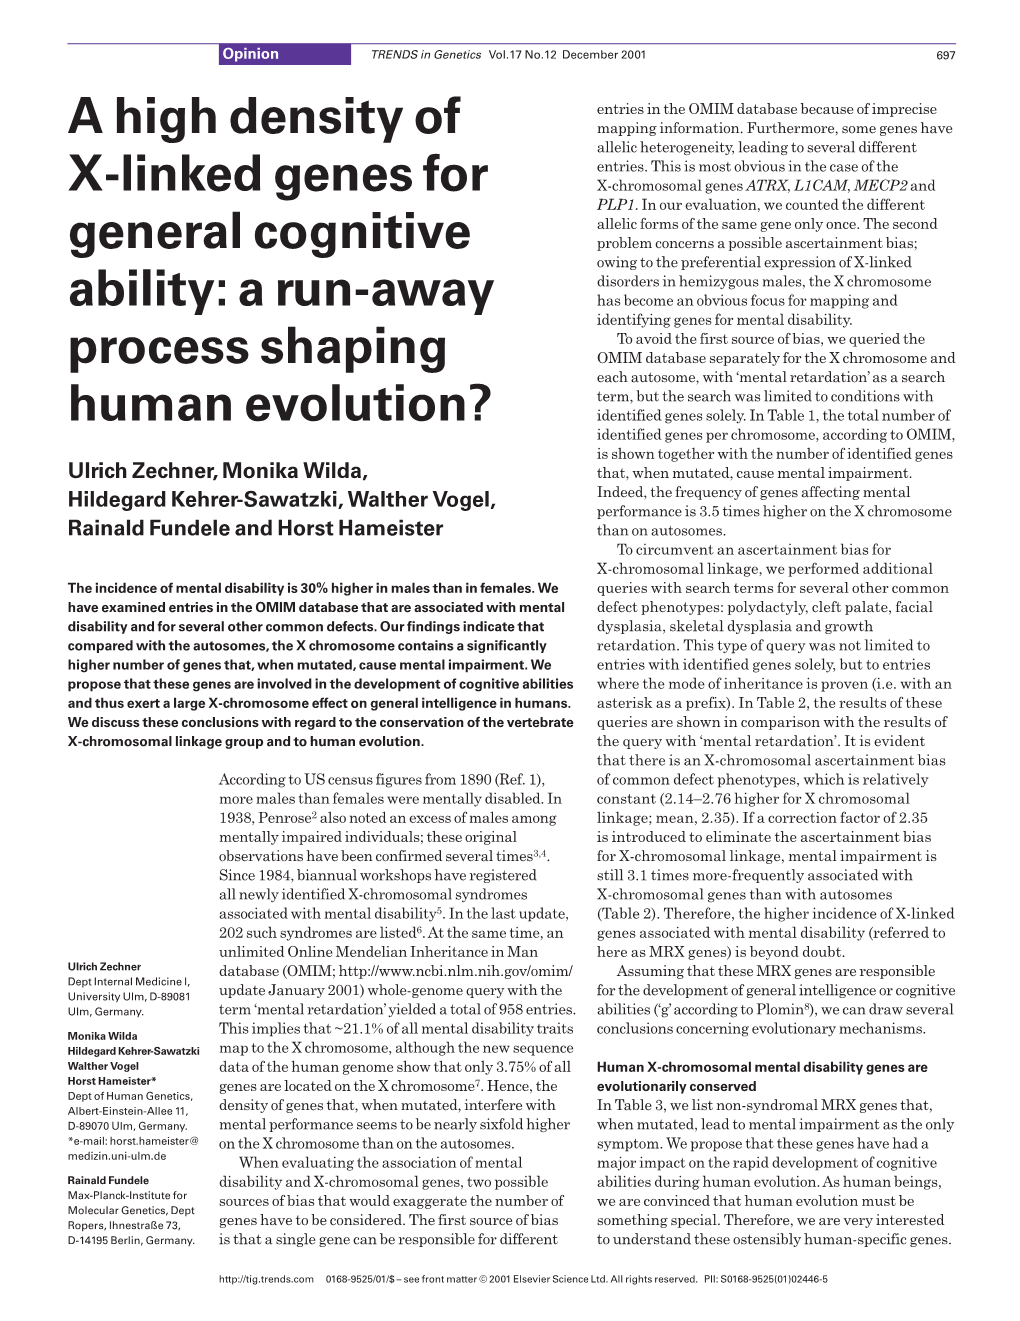 A High Density of X-Linked Genes for General Cognitive Ability